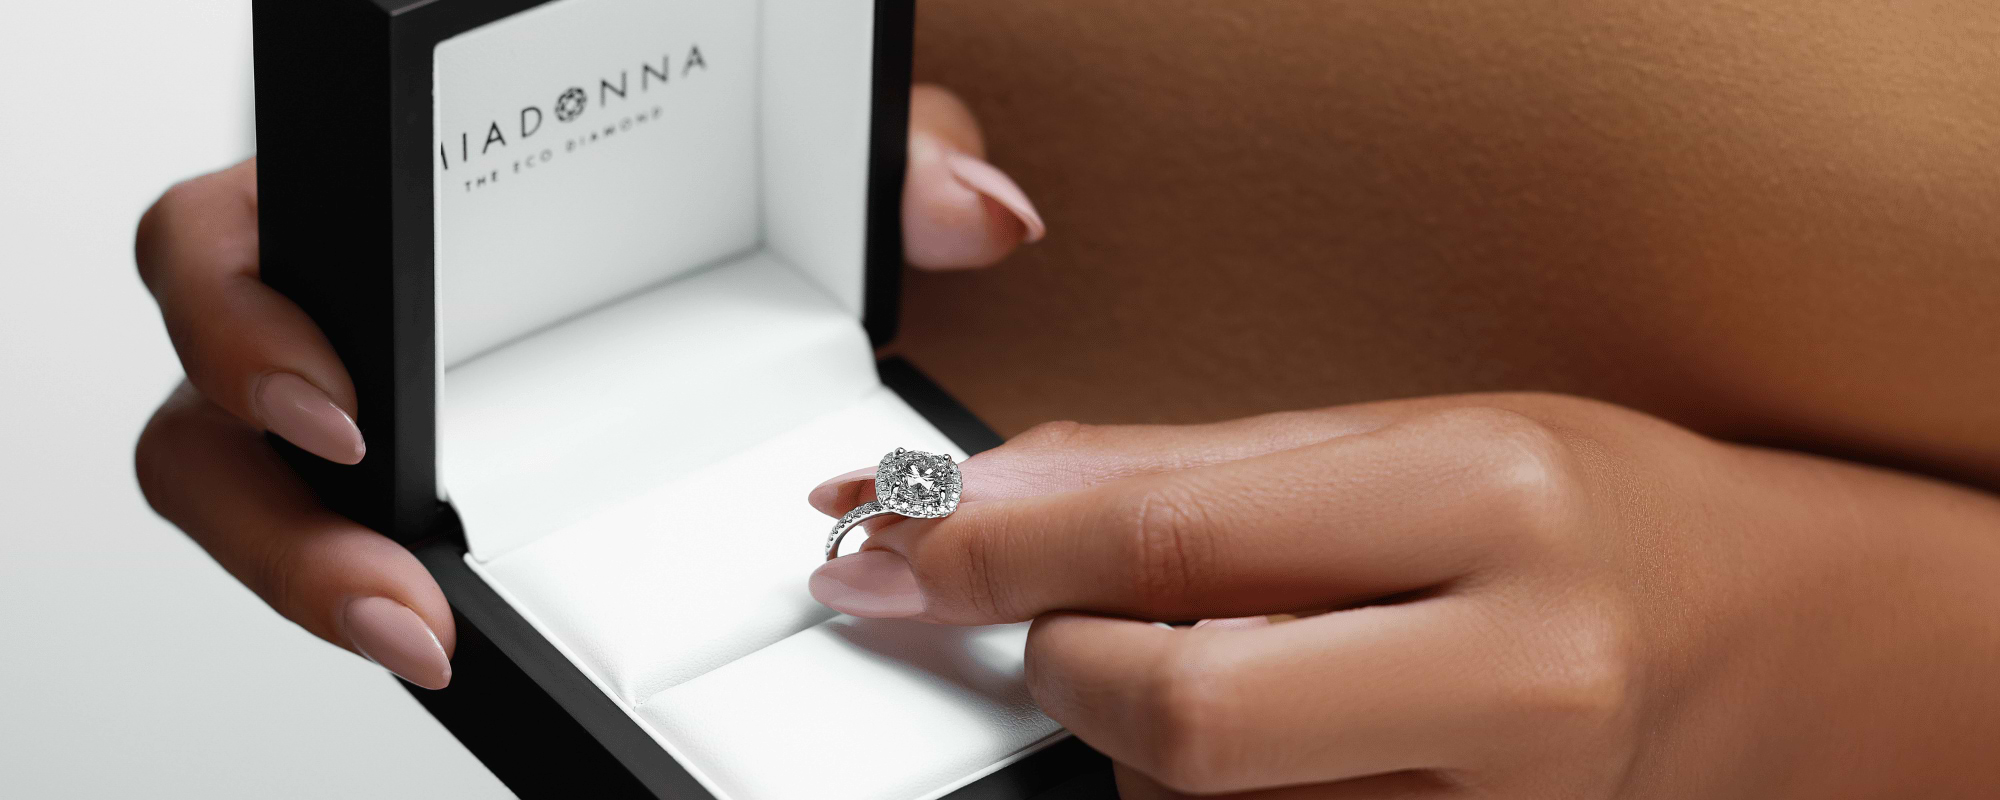 How To Save Money On Buying An Engagement Ring